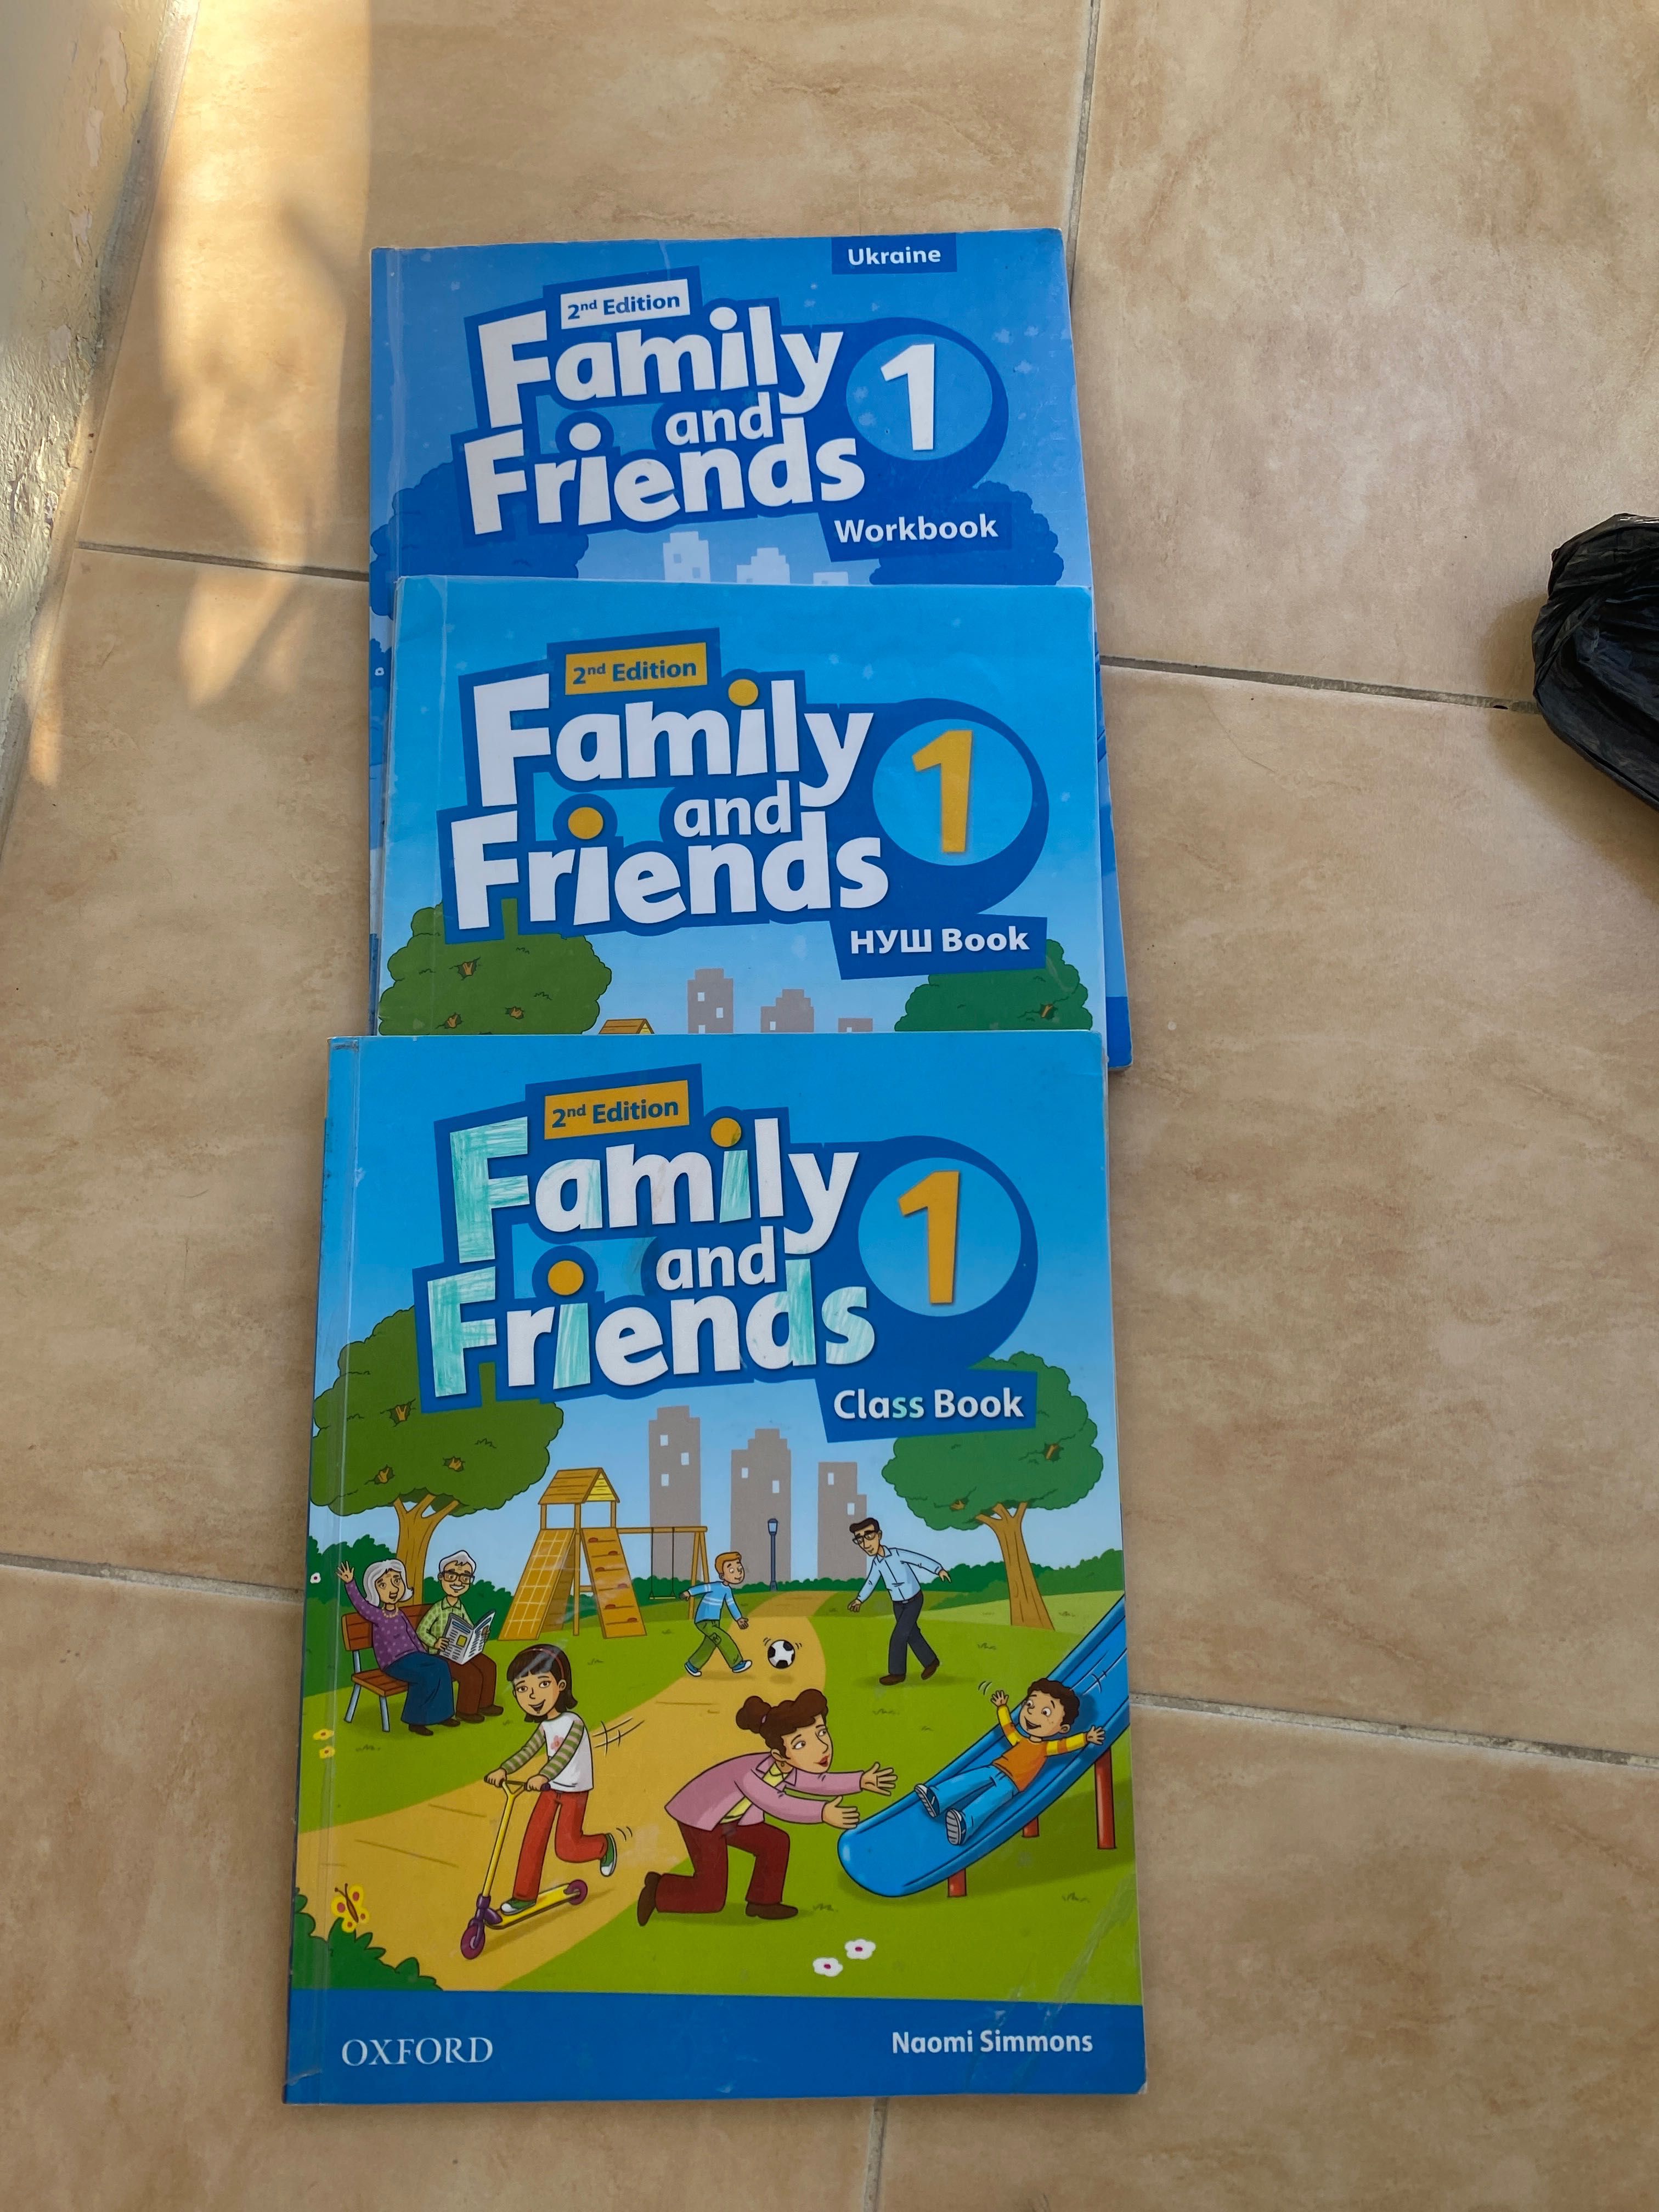 Family and friends 1 клас НУШ Book, Class book, Workbook